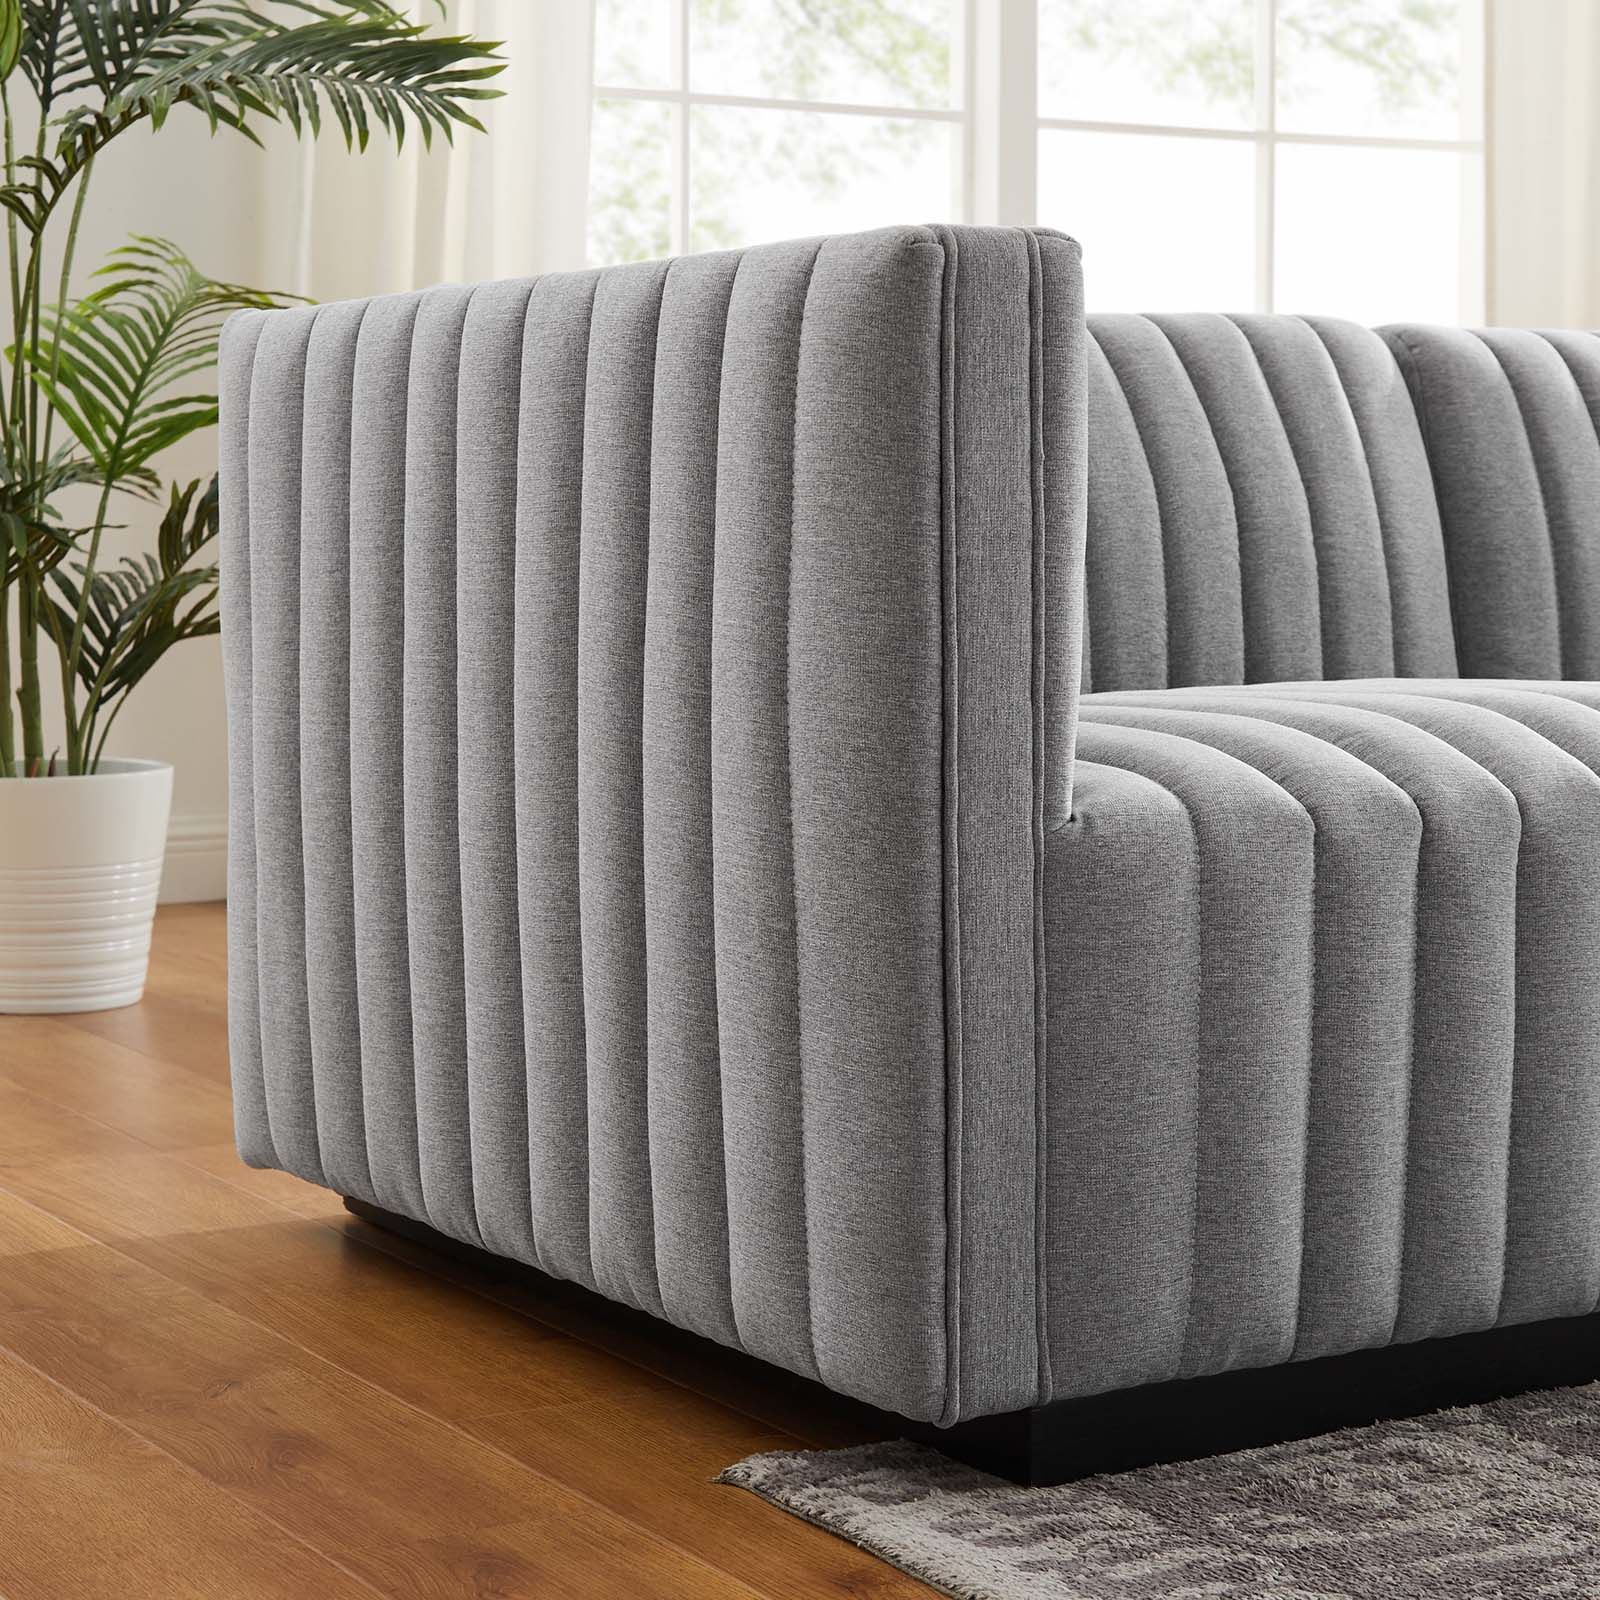 Conjure Channel Tufted Upholstered Fabric Sofa